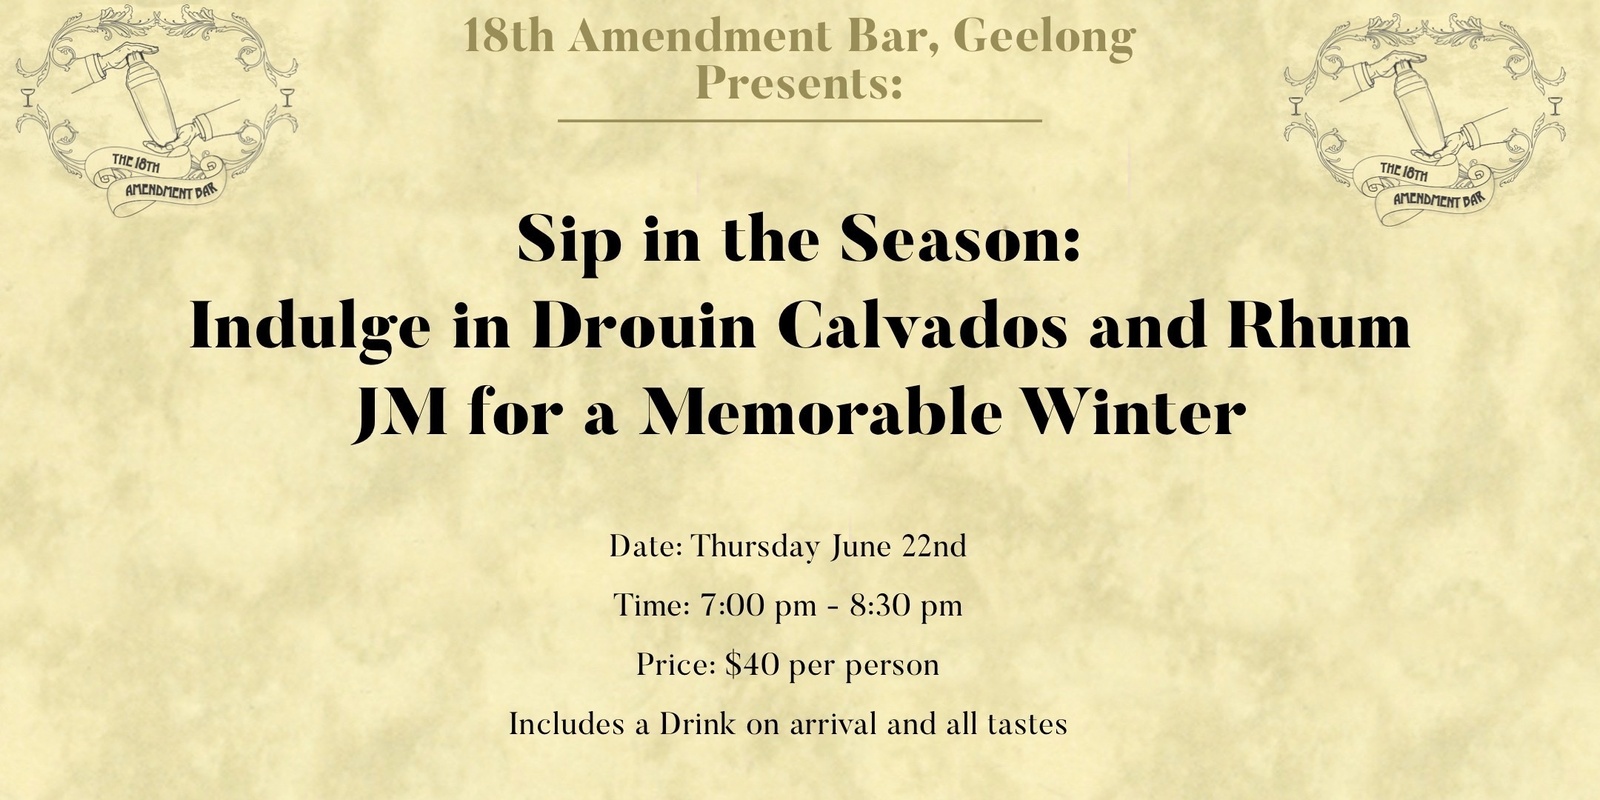 Banner image for "Sip in the Season: Indulge in Drouin Calvados and Rhum JM for a Memorable Winter"